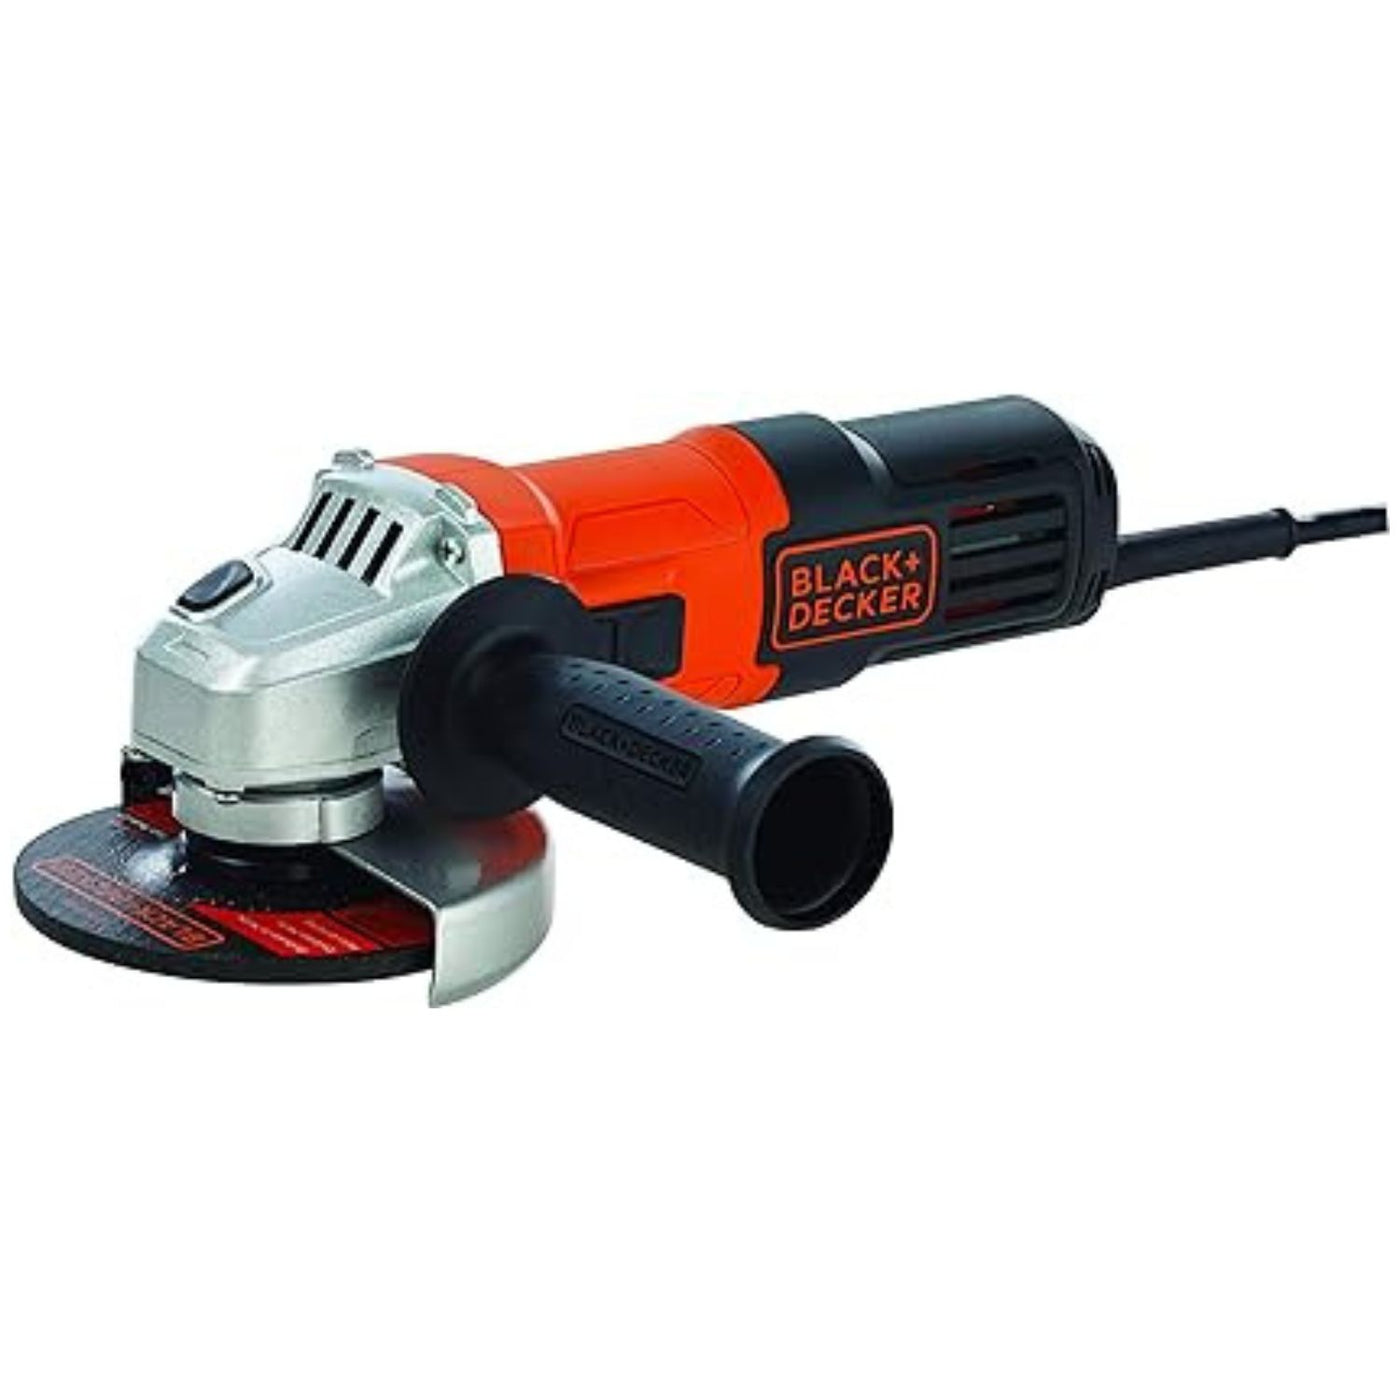 650W 115mm Small Angle Grinder with 3 Metal Grinding Discs